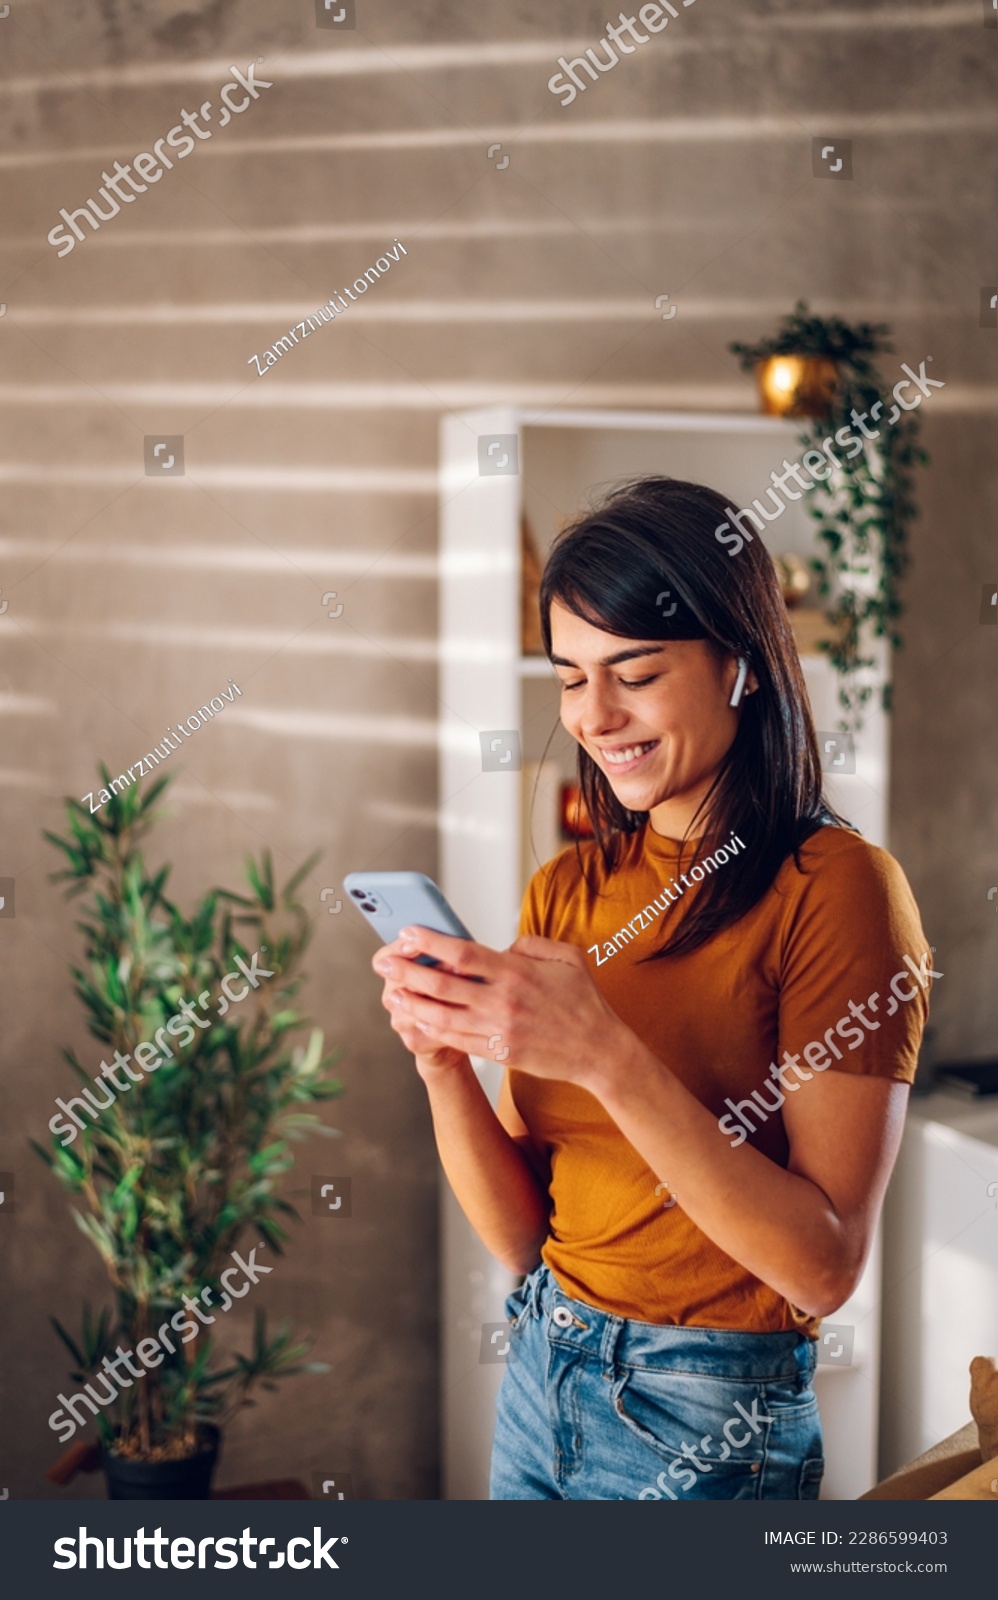 Beautiful woman checking social media while using smartphone and airpods at home. Smiling young female using mobile phone app and playing game, shopping online or reading news. Copy space. #2286599403